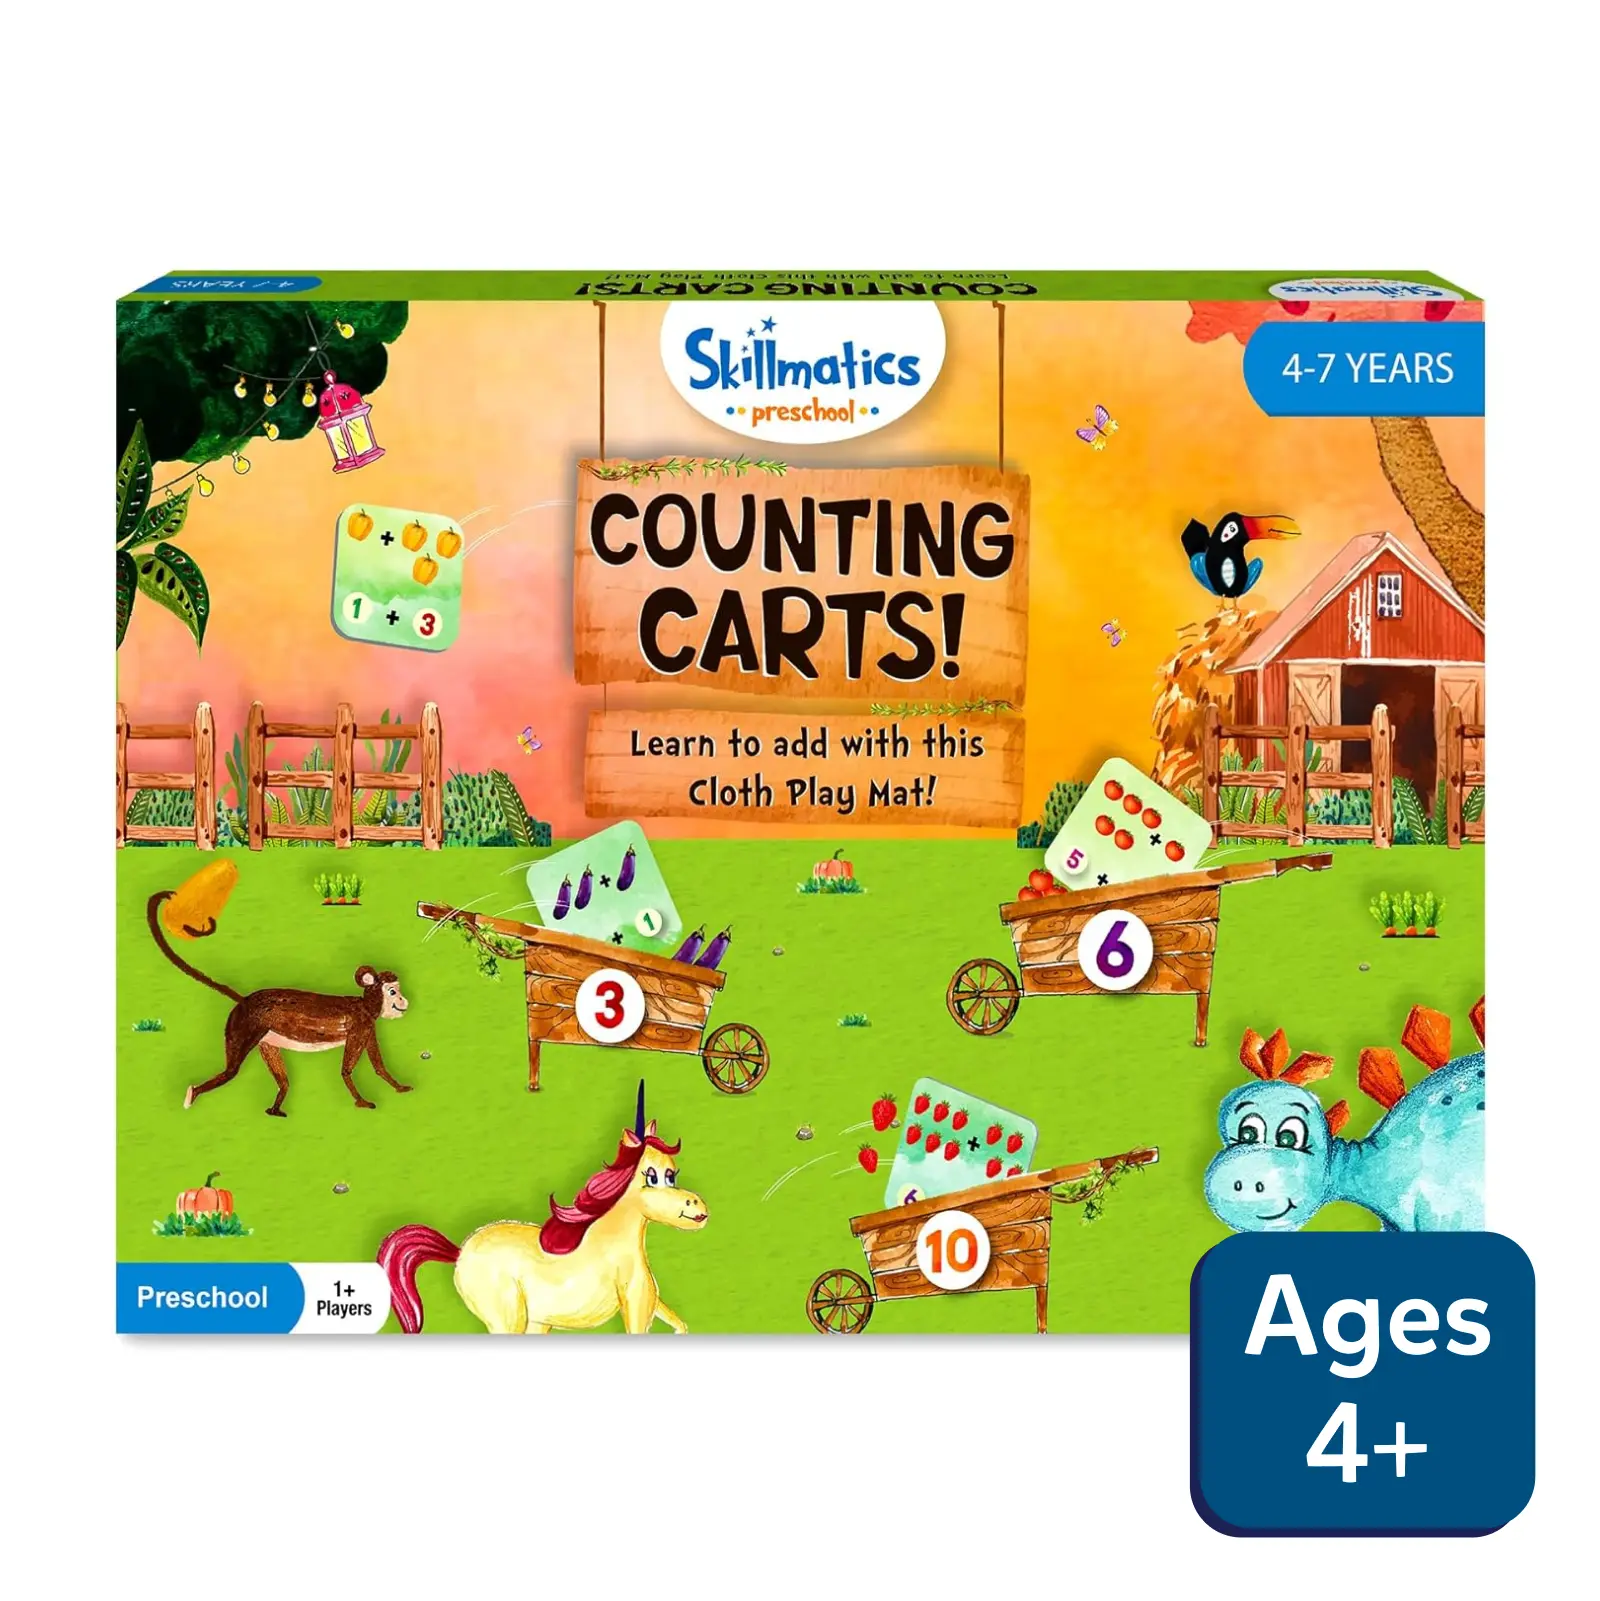 Counting Carts | Activity Play Mat (ages 4-7)